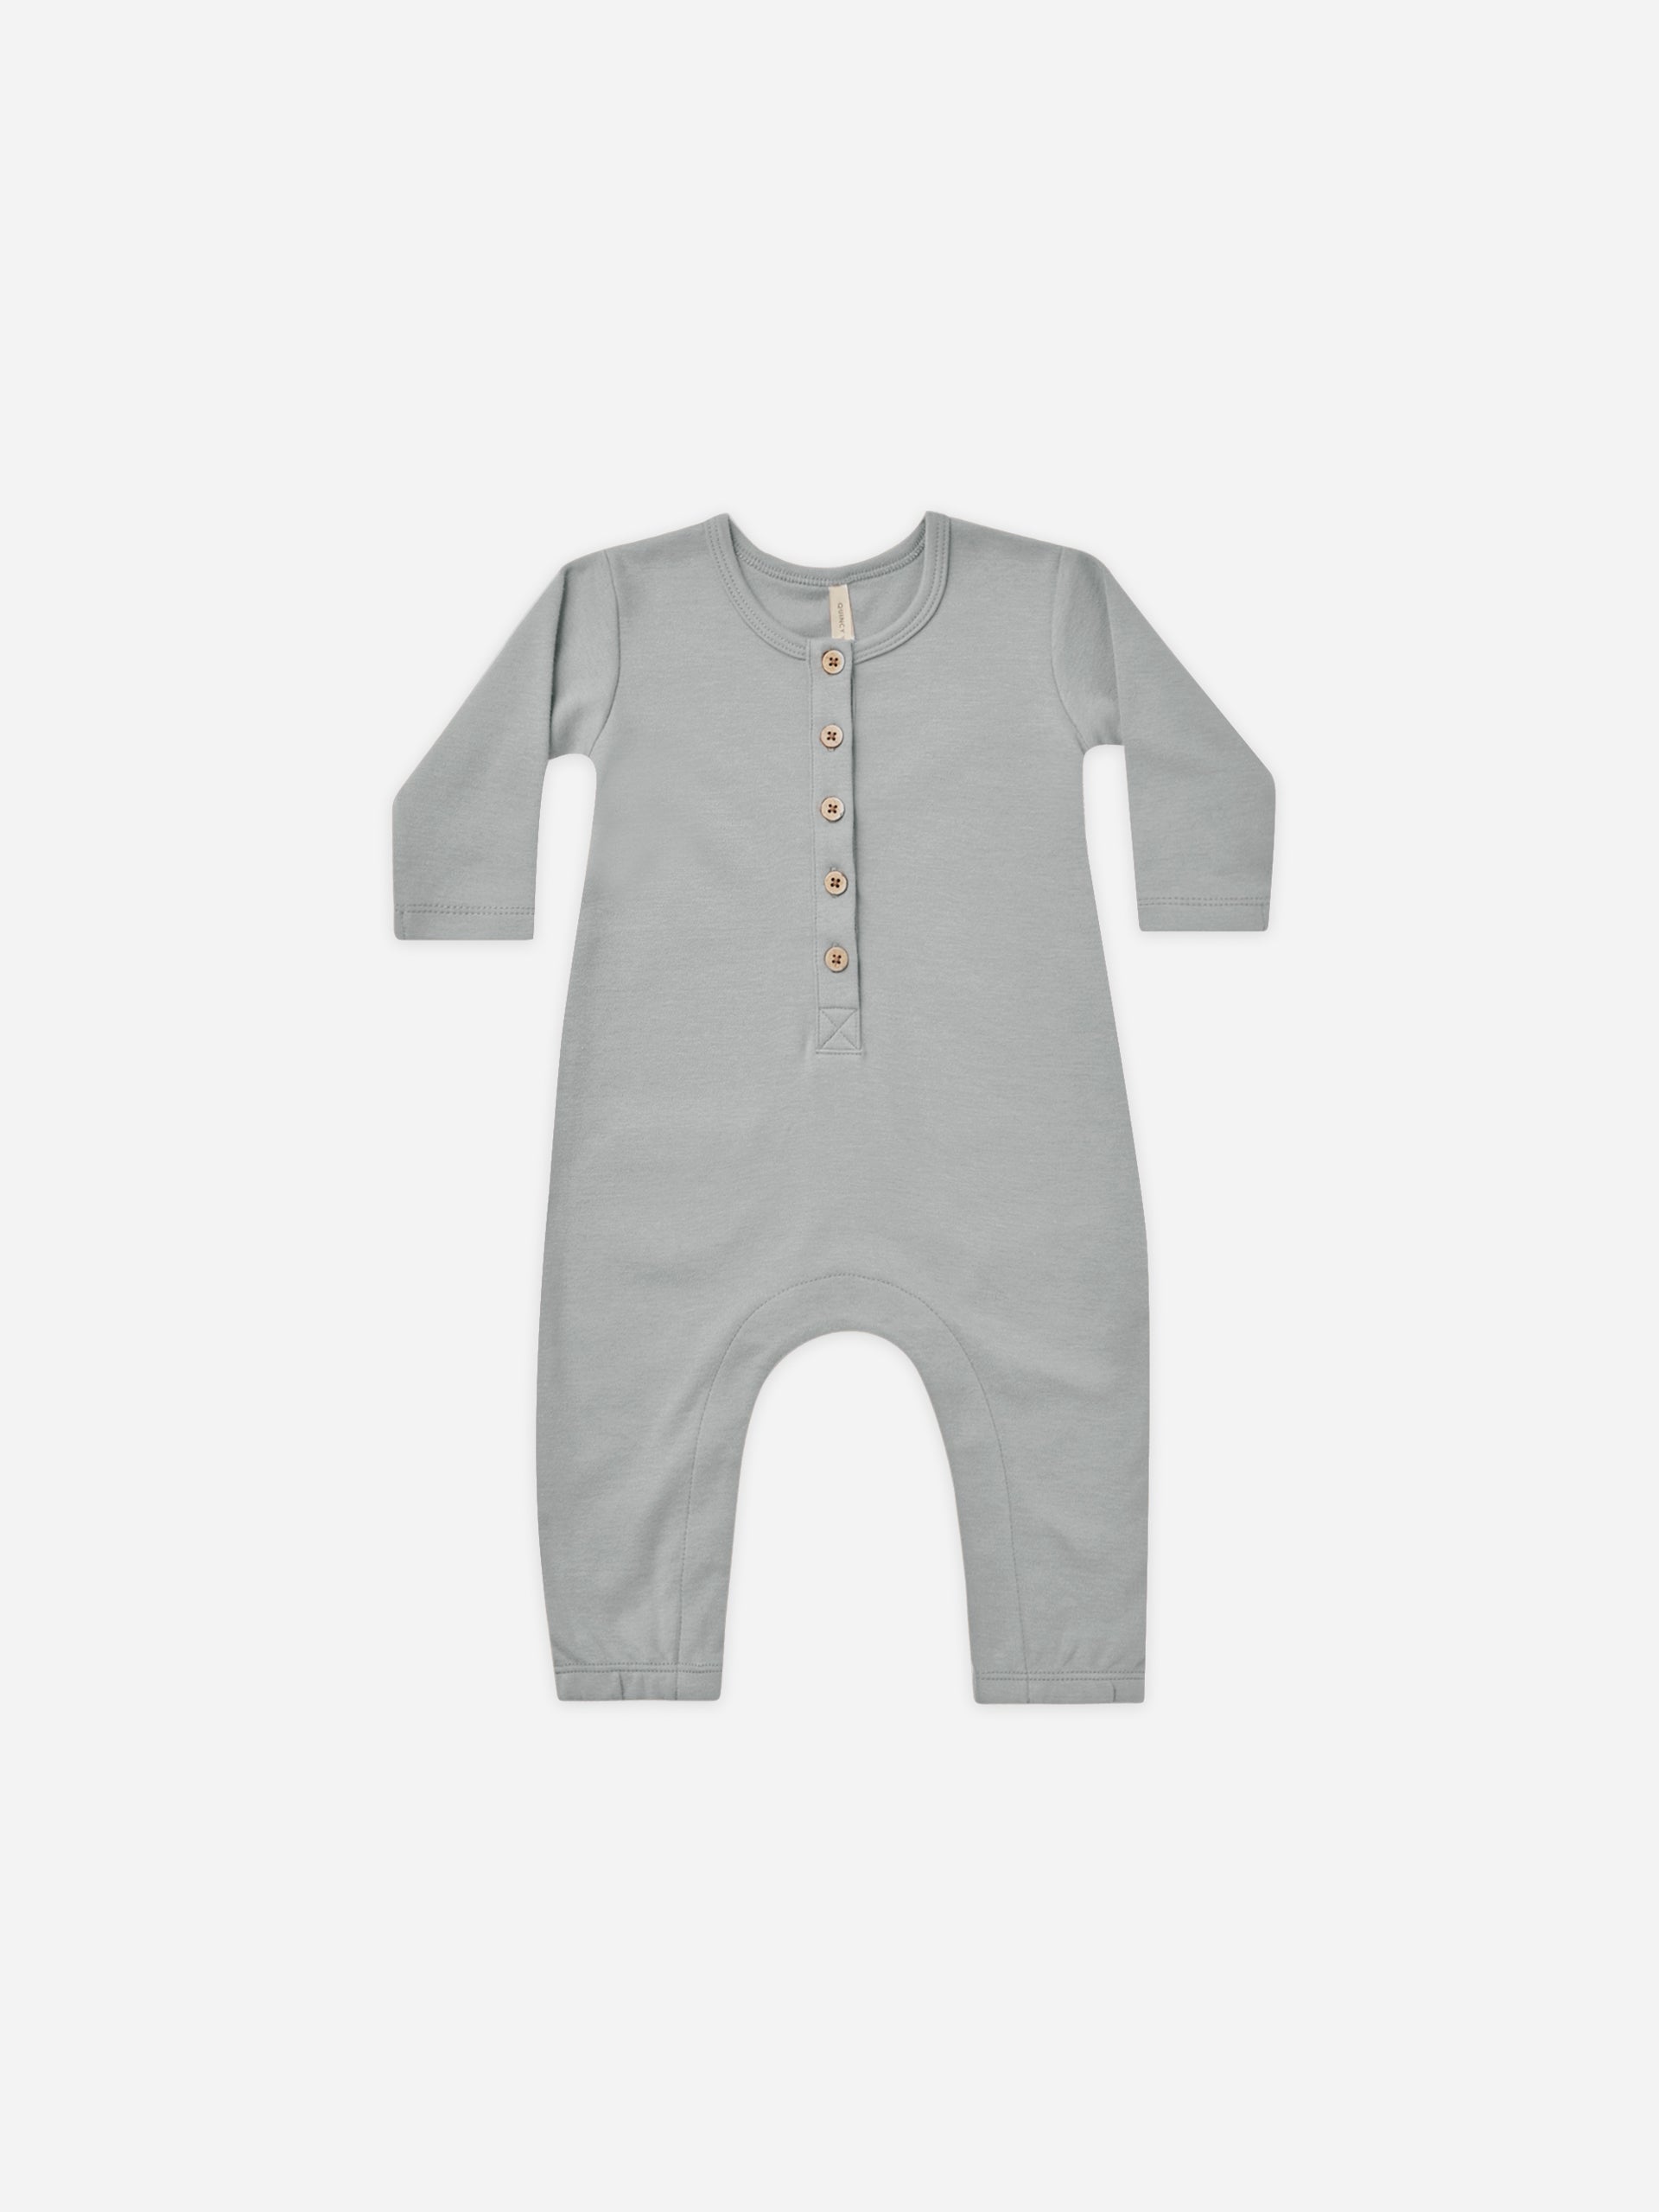 Long Sleeve Jumpsuit || Dusty Blue - Rylee + Cru | Kids Clothes | Trendy Baby Clothes | Modern Infant Outfits |